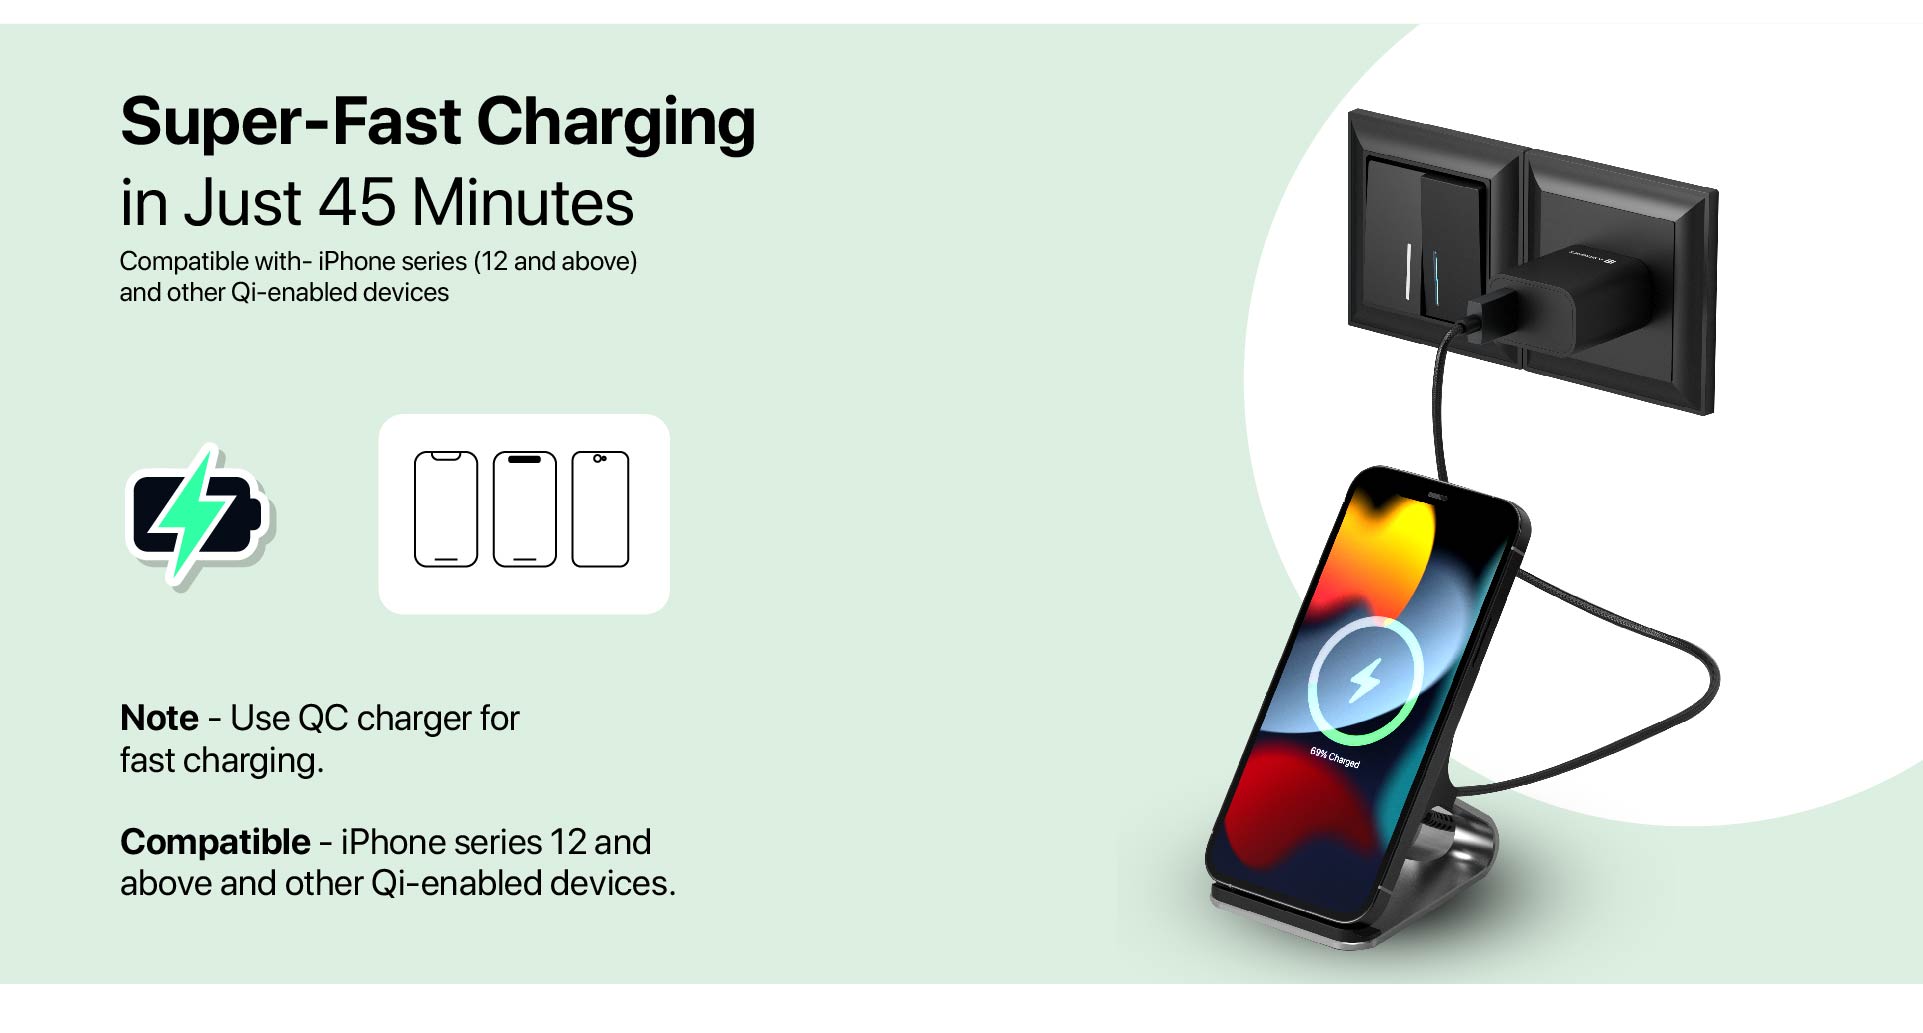 Portronics Freedom 15 Double Coil for fast charging 15W Wireless Charger